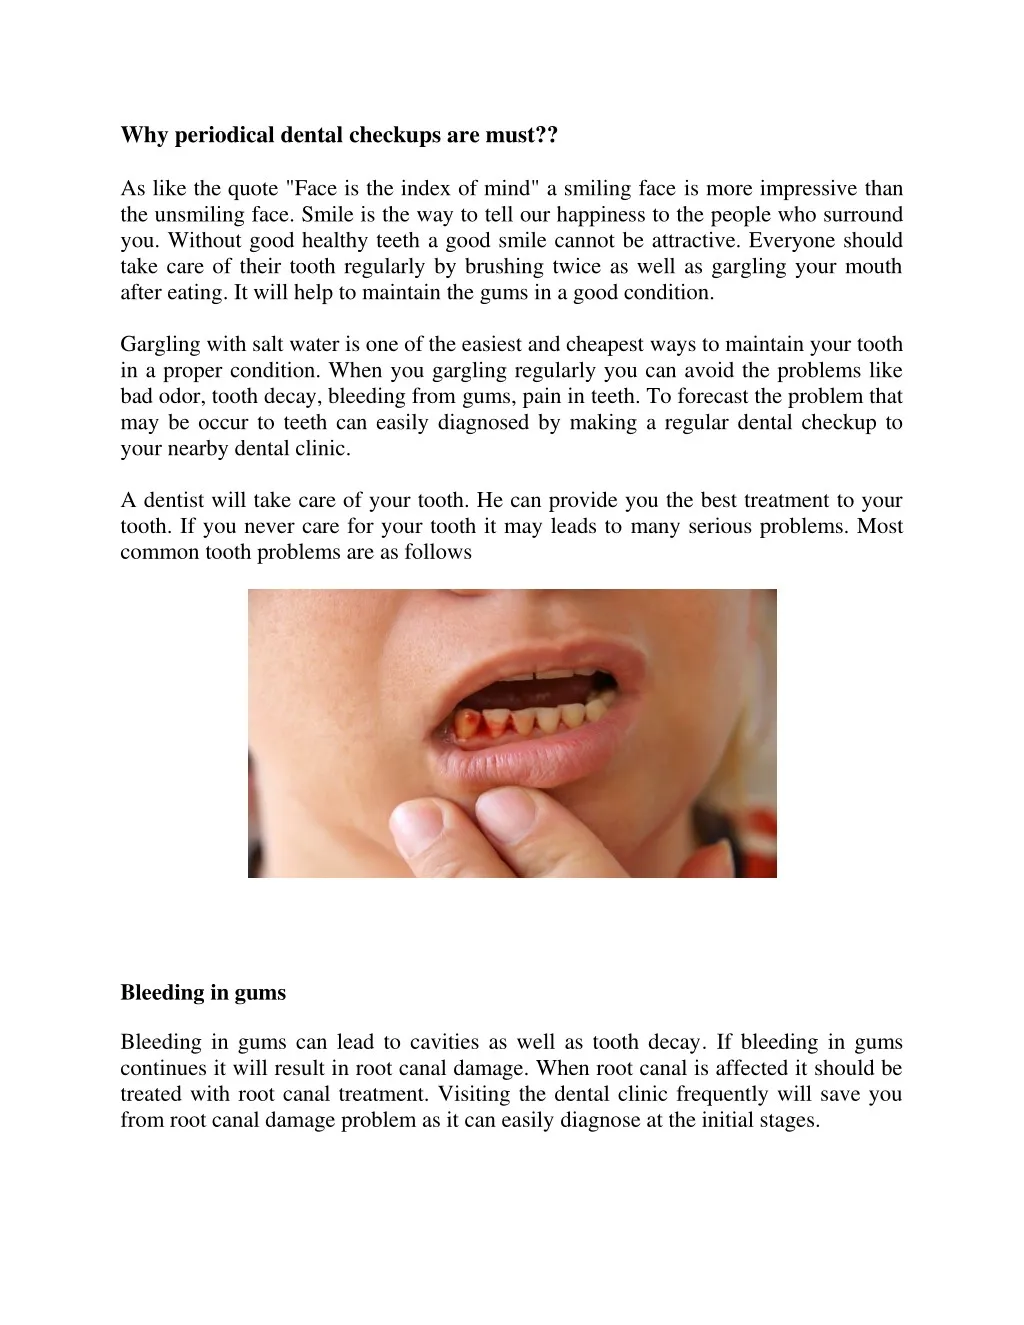 why periodical dental checkups are must as like